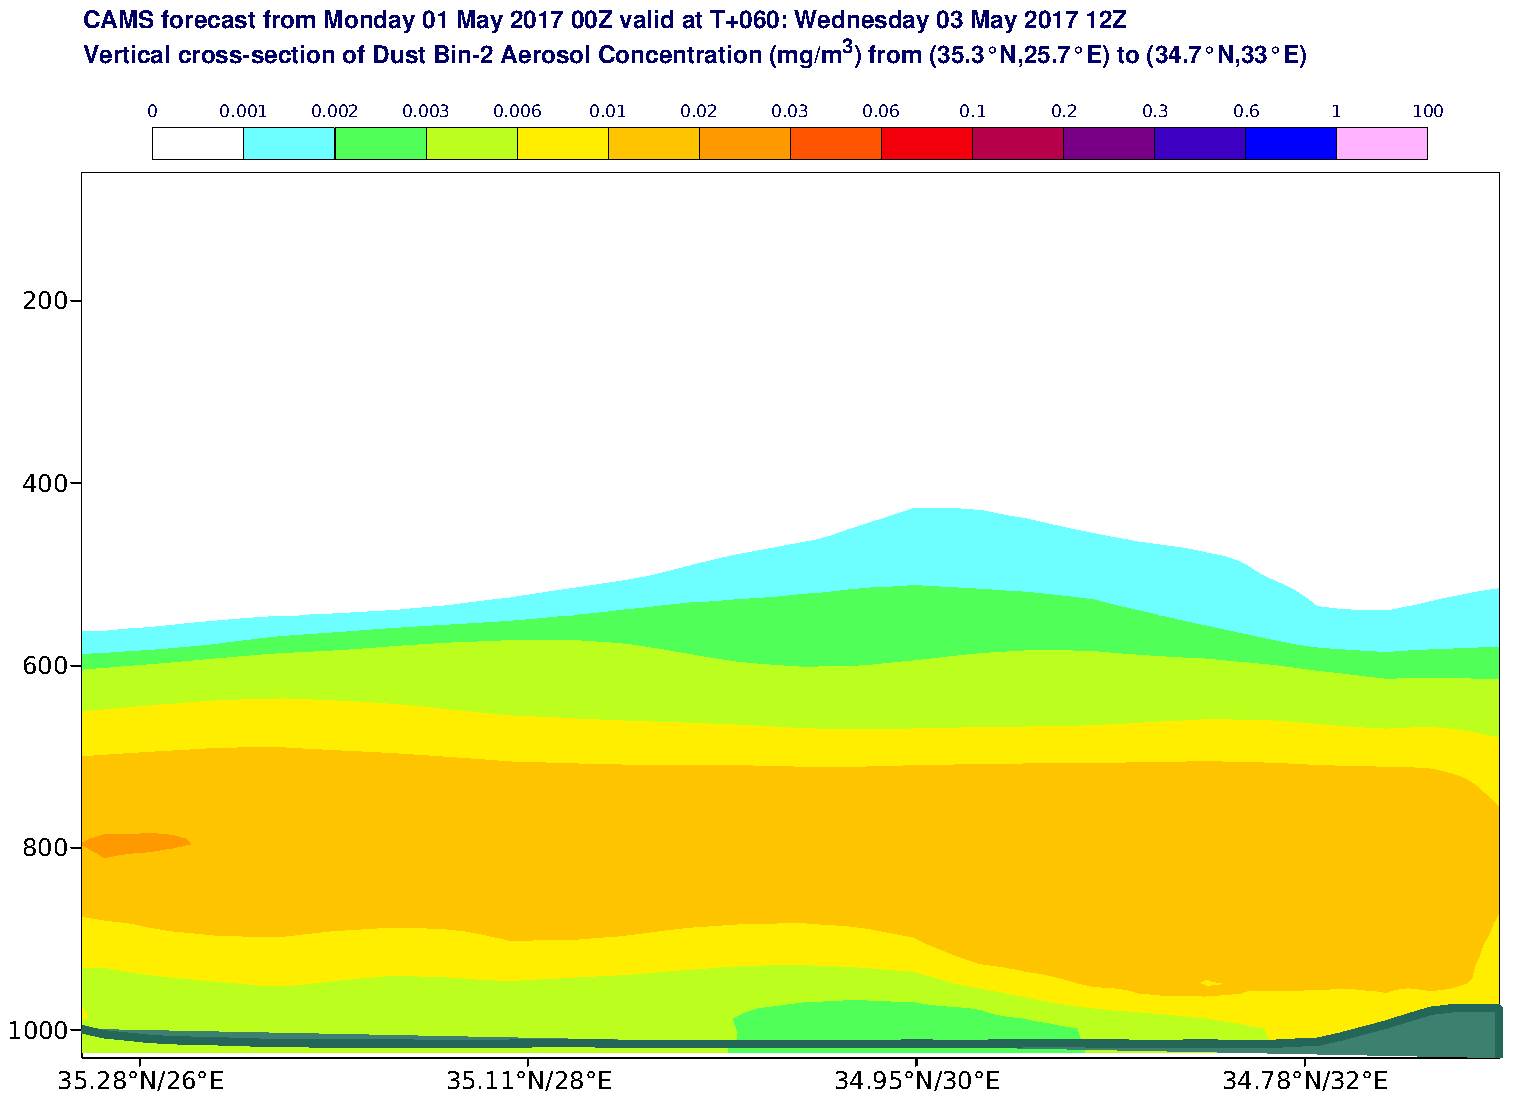 Vertical cross-section of Dust Bin-2 Aerosol Concentration (mg/m3) valid at T60 - 2017-05-03 12:00